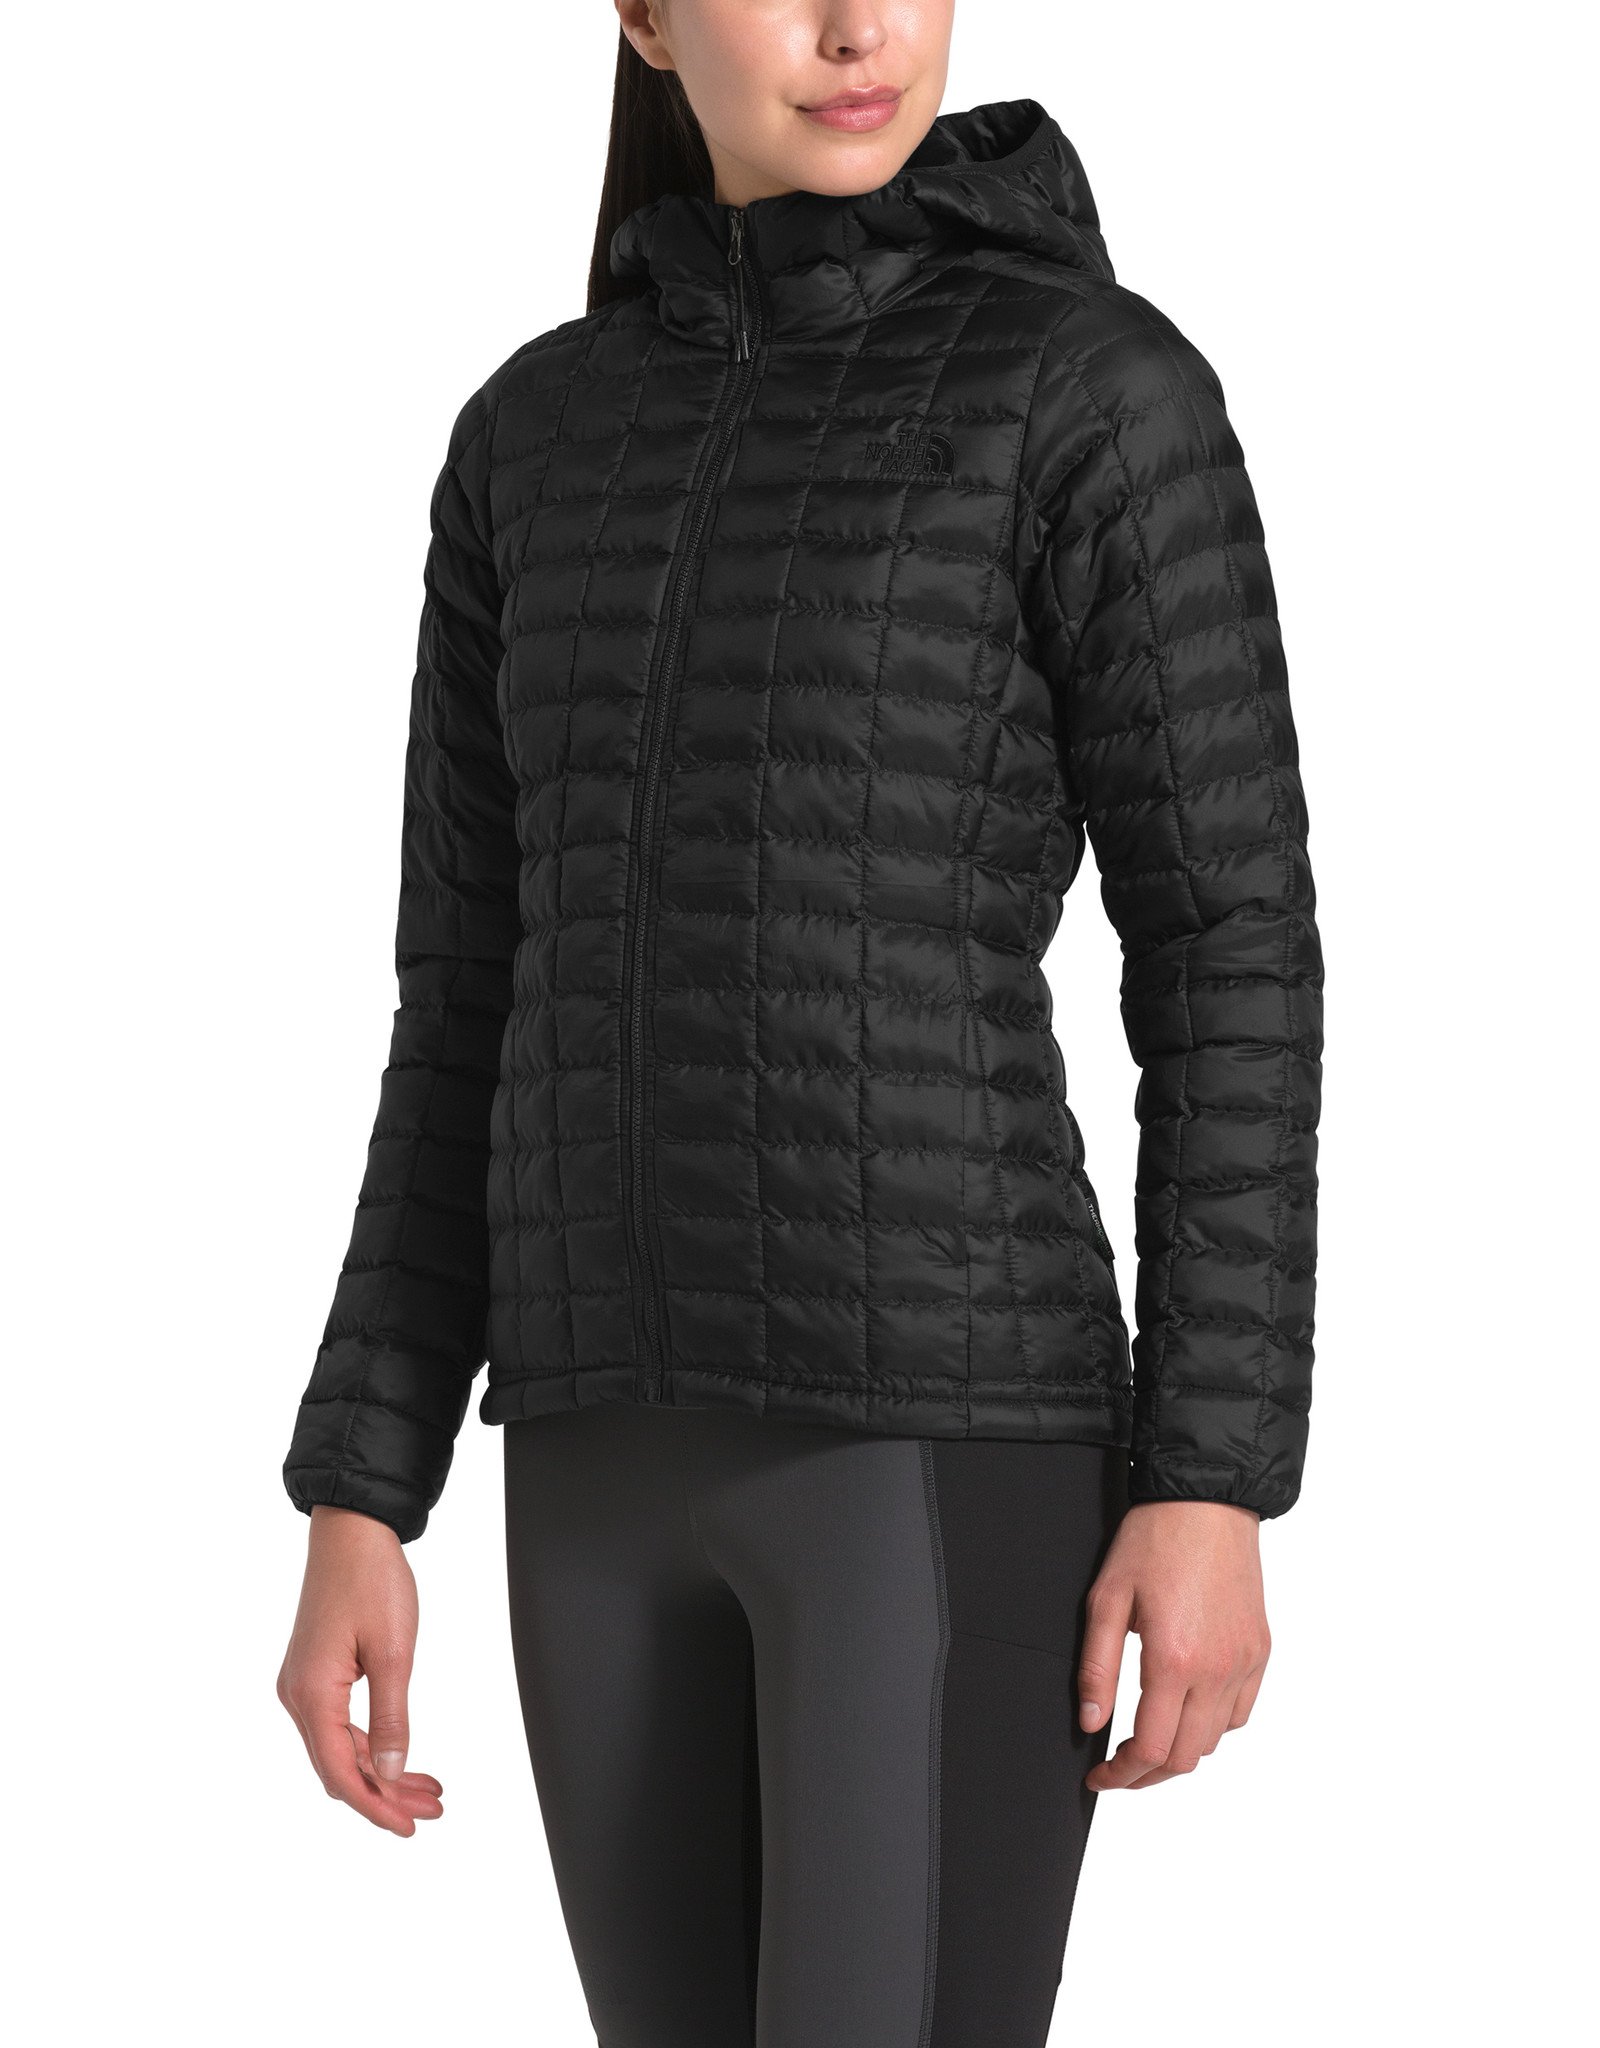 north face thermoball hoodie ladies